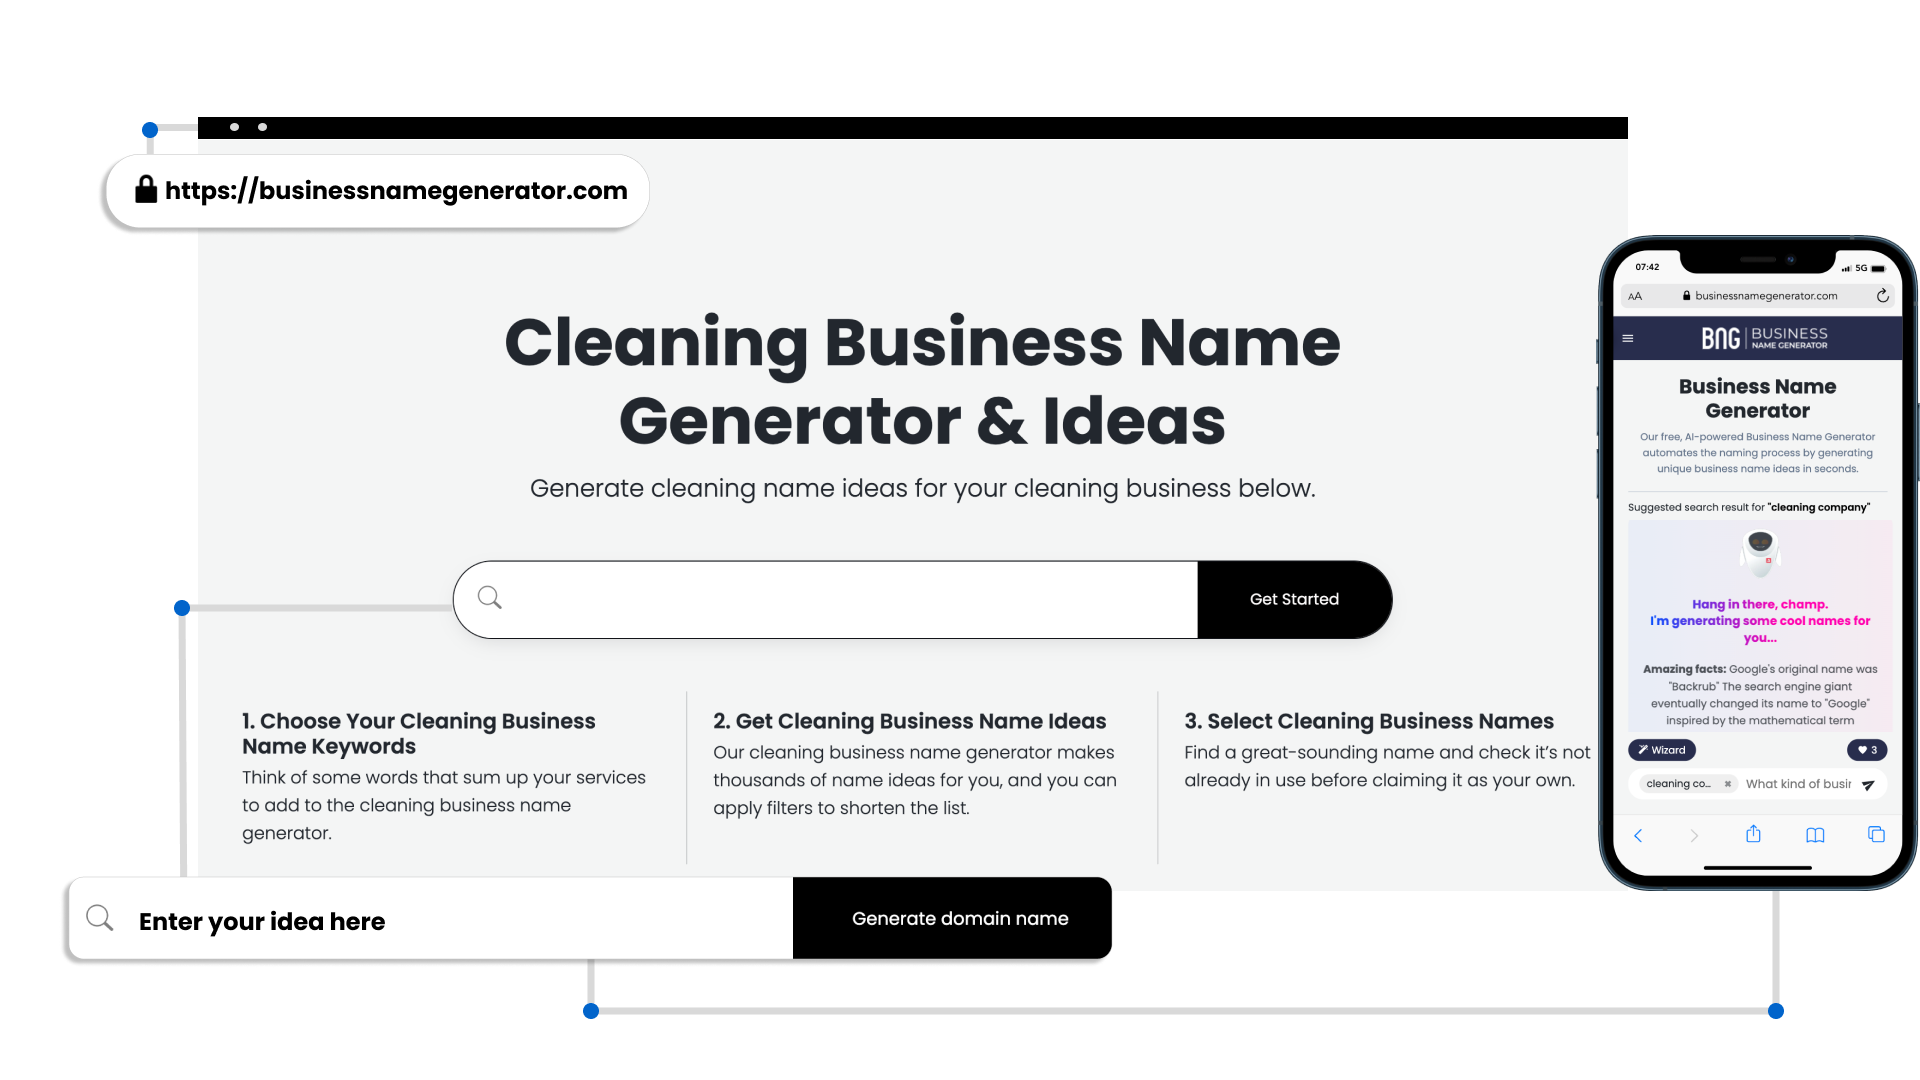 How to use our Cleaning Business Name Generator